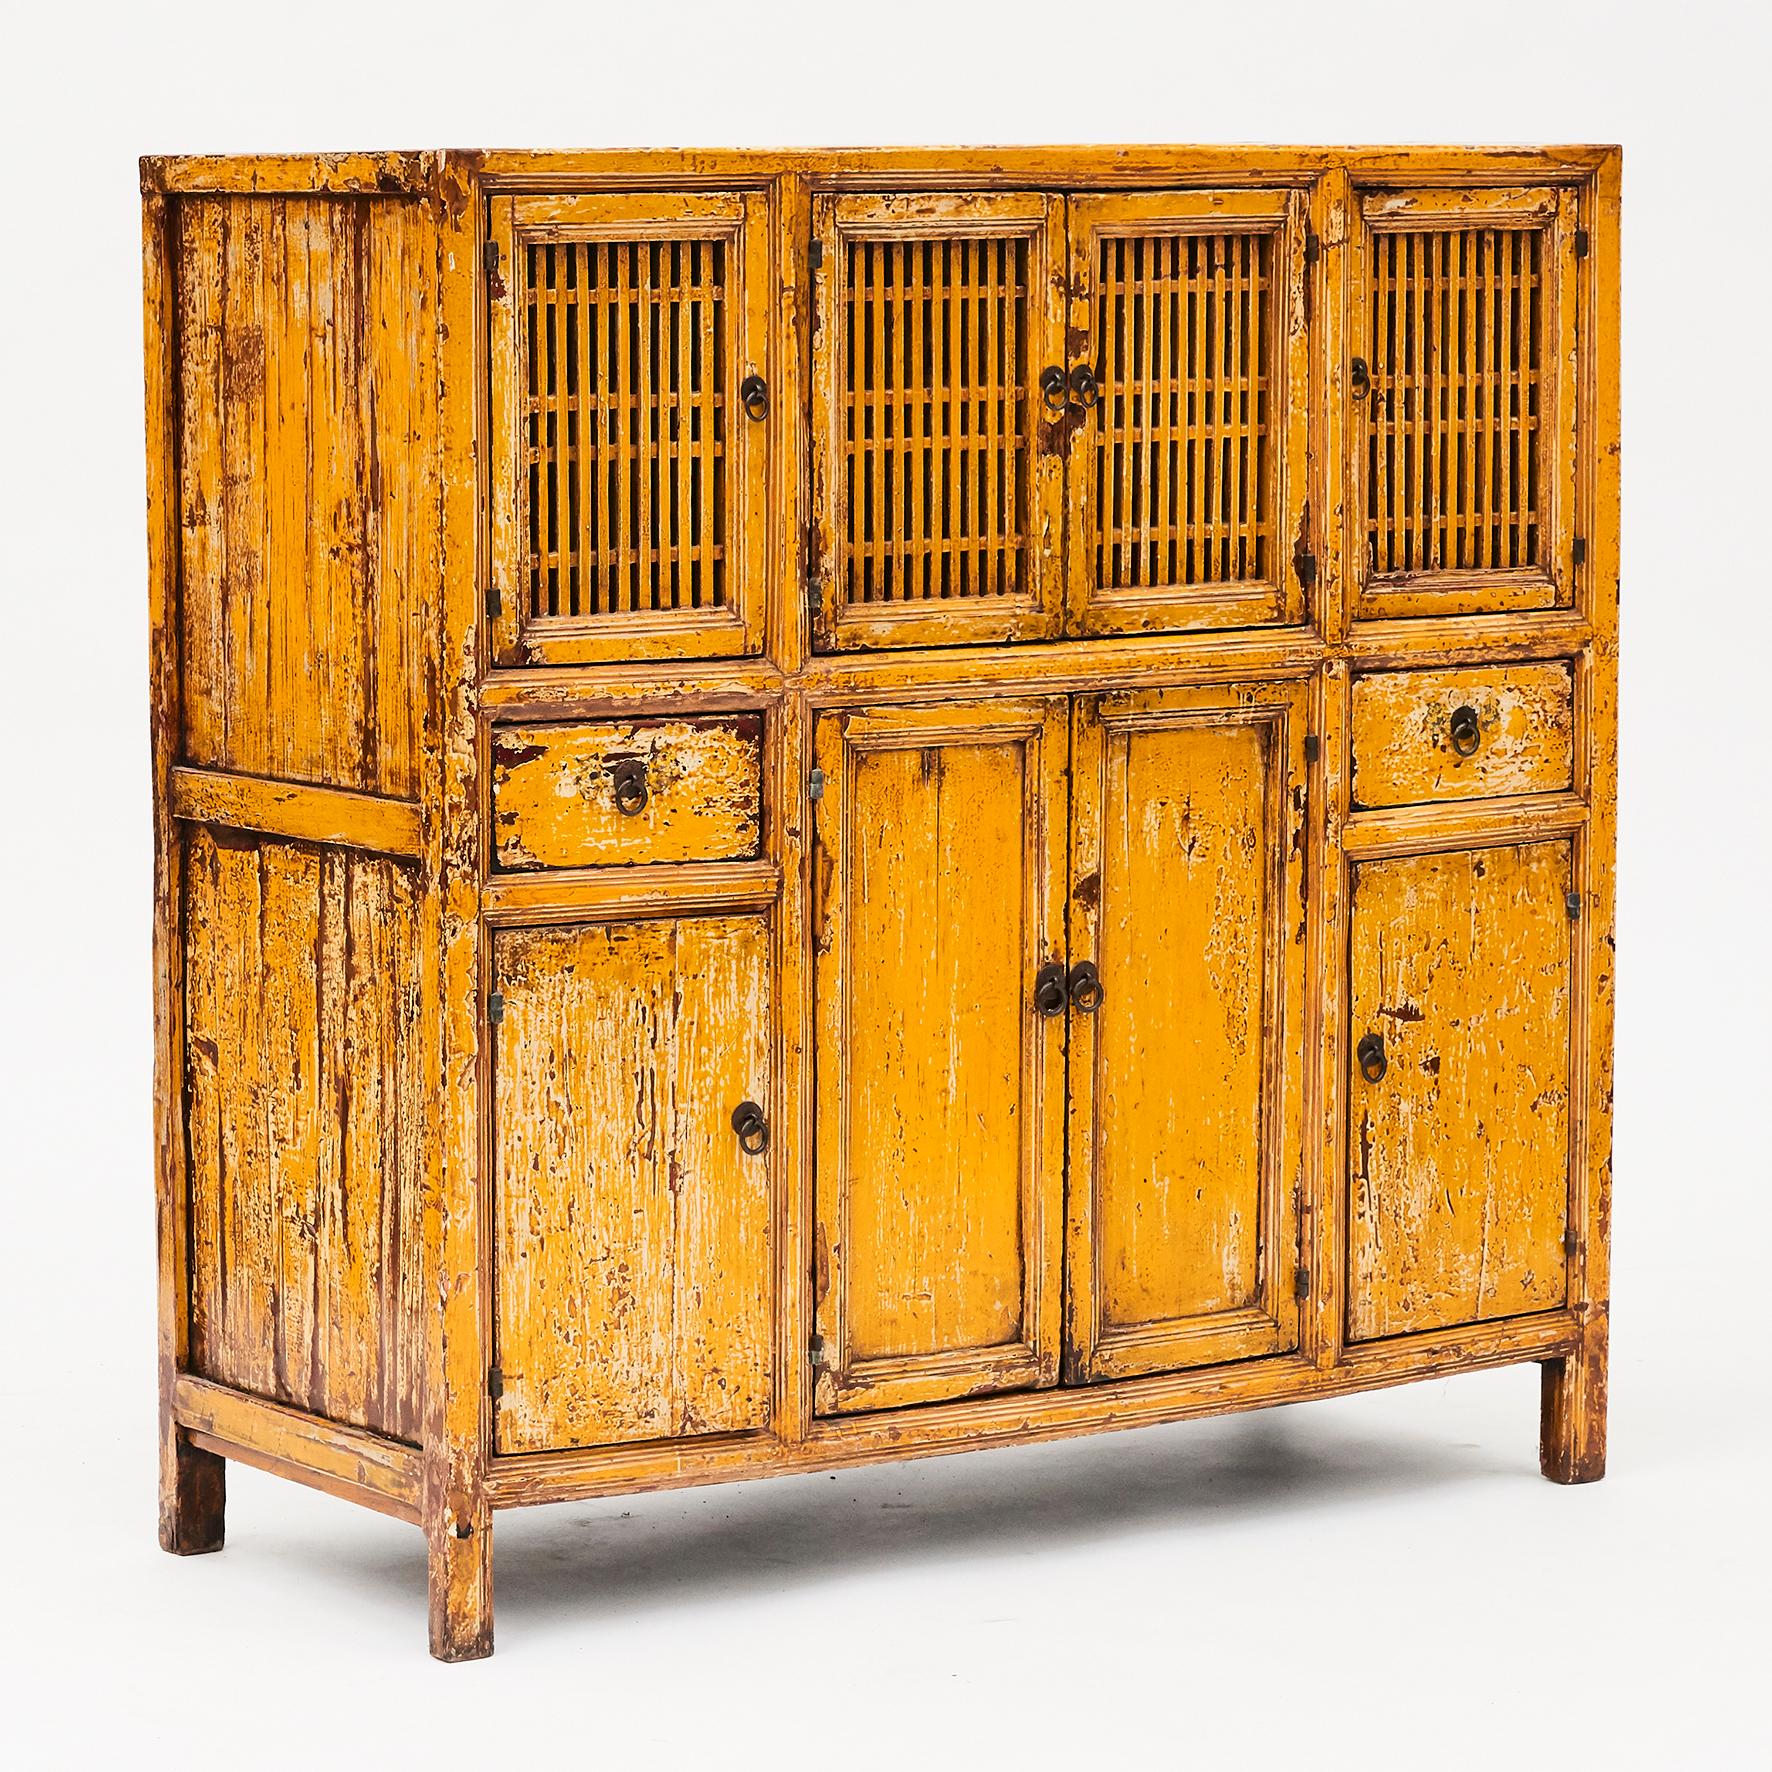 Lattice door cabinet from Shangdong, China and dates to the late 1800s.
Original condition and lacquer color with natural patina.
An extremely functional and pretty piece in a warm yellow color tone.

This type of cabinets was originally used to